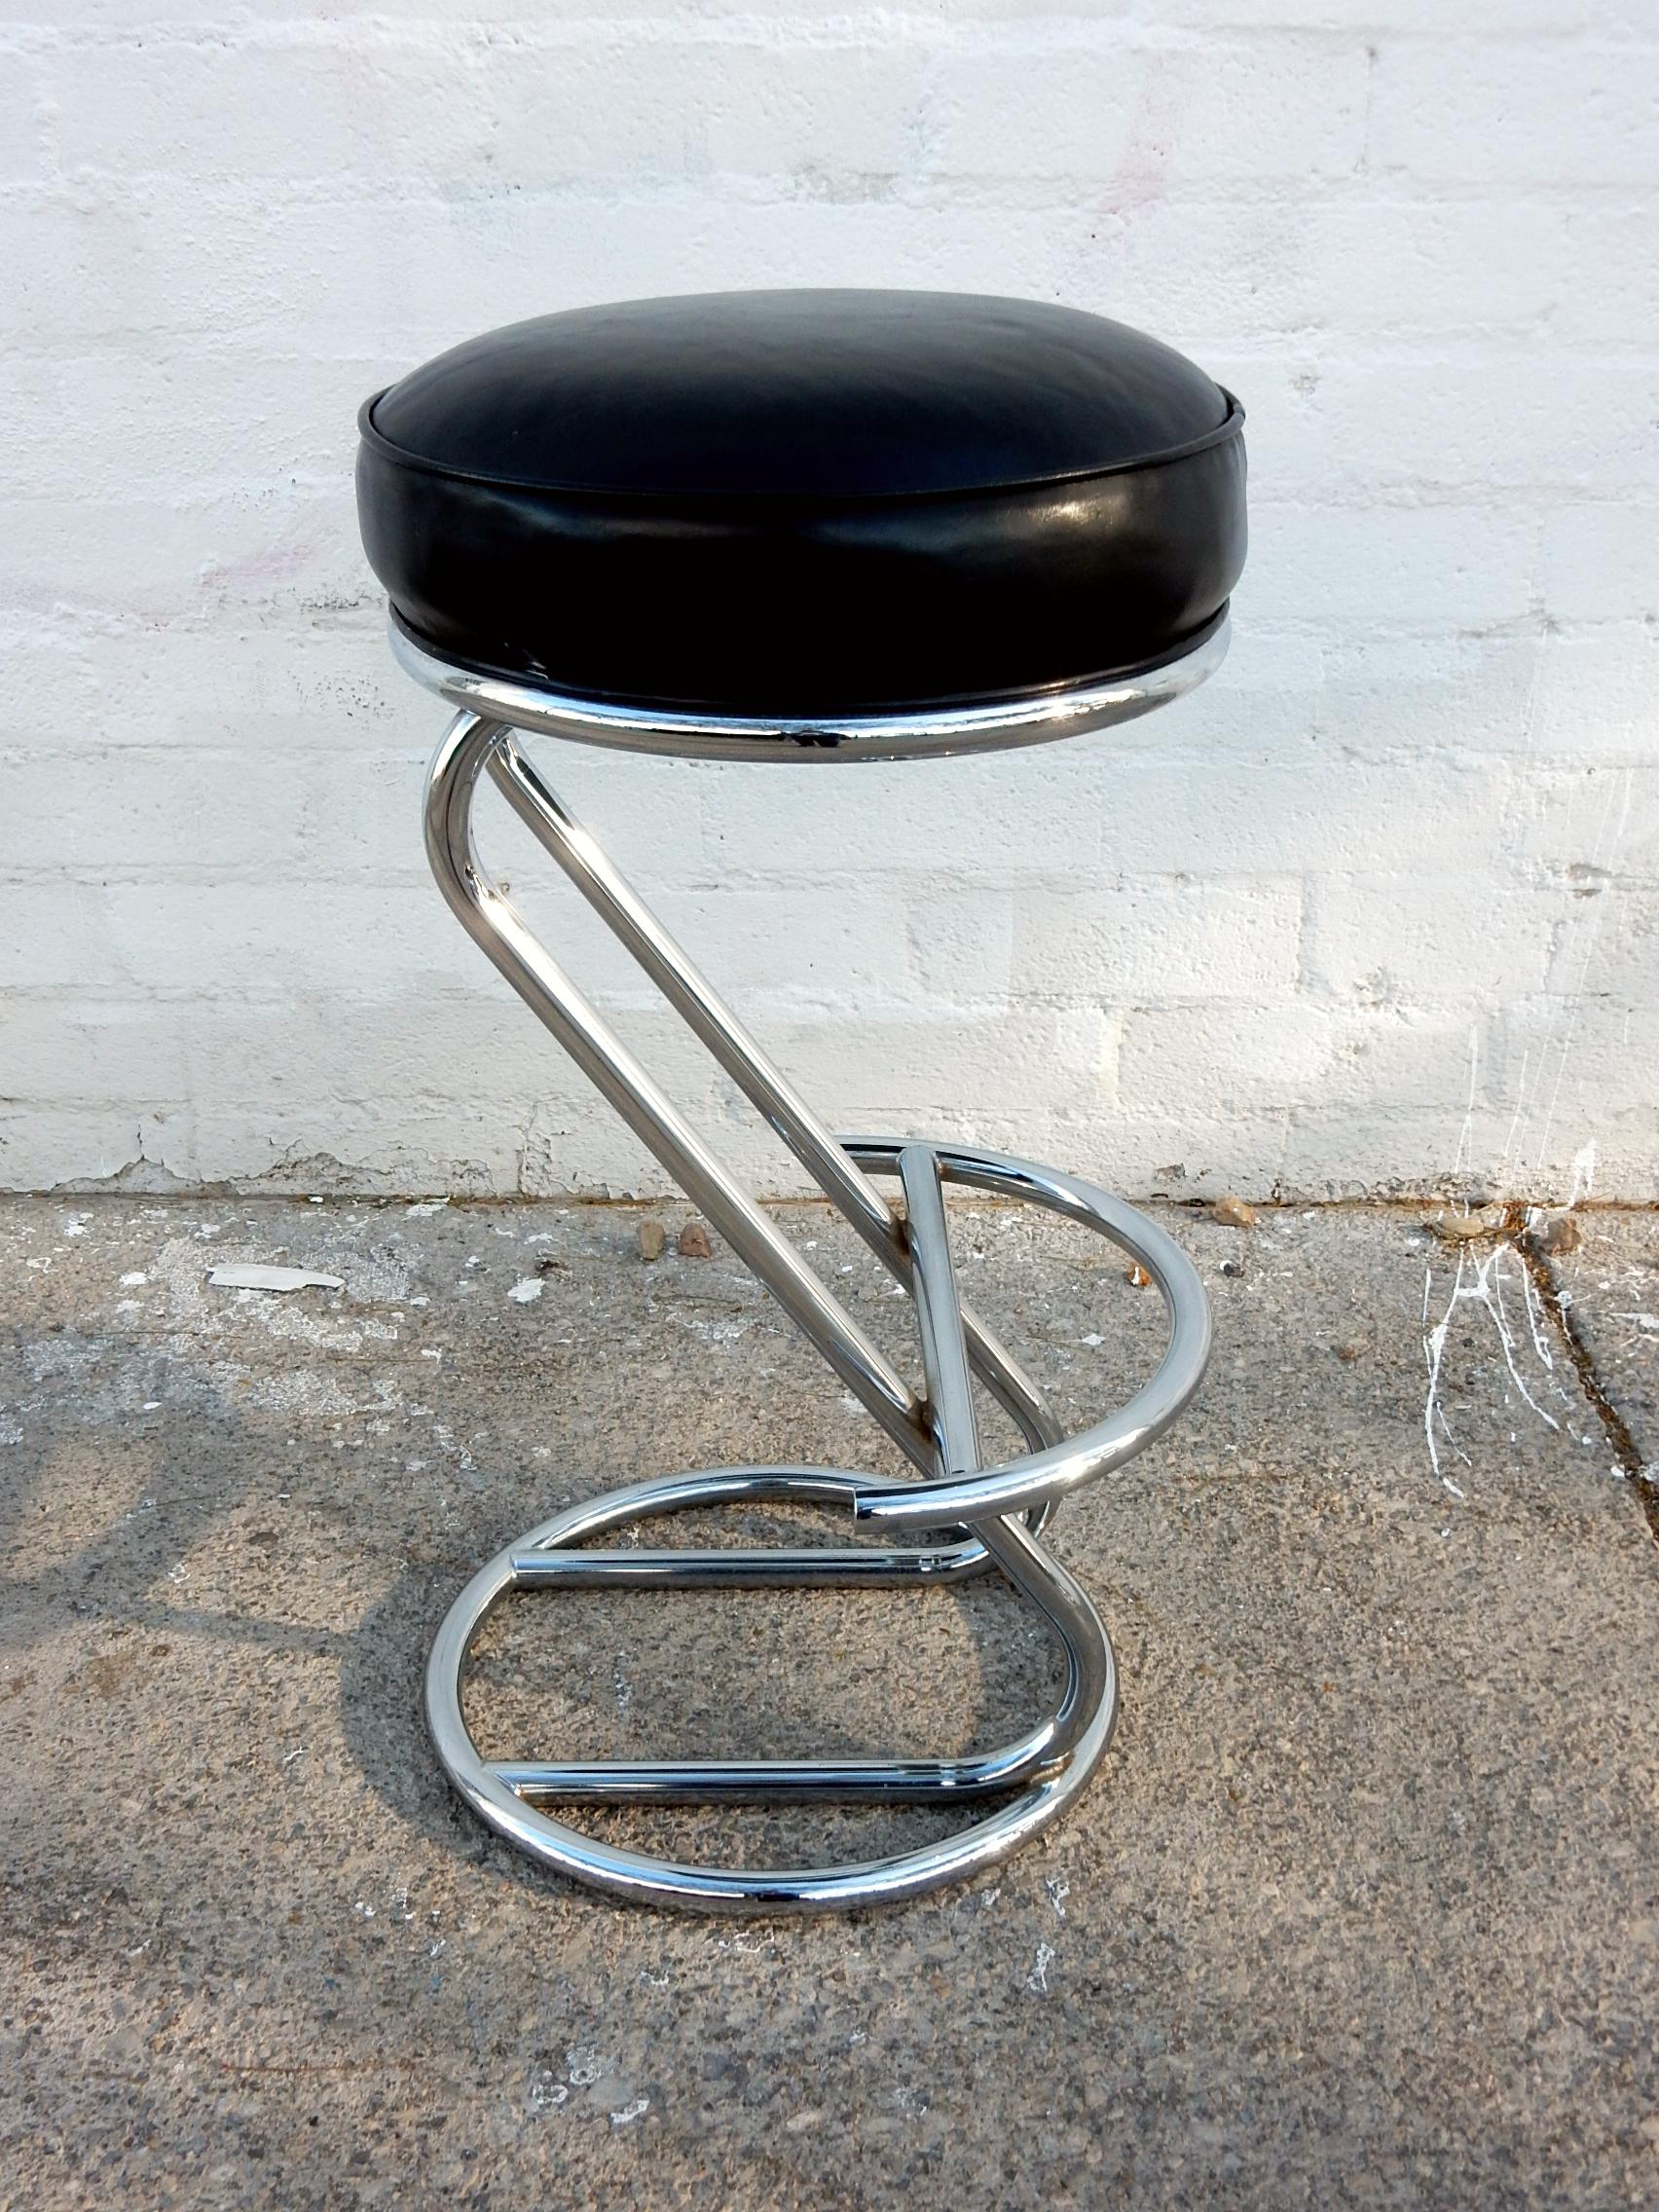 Tall, plush, leather bar stools from the 1960s.
Sculpted of steel tubing with triple chrome plating.
Muffin top seating area consisting of premium black leather with memory foam.
Heavy solid and very comfortable.
32 inch to top of cushion.